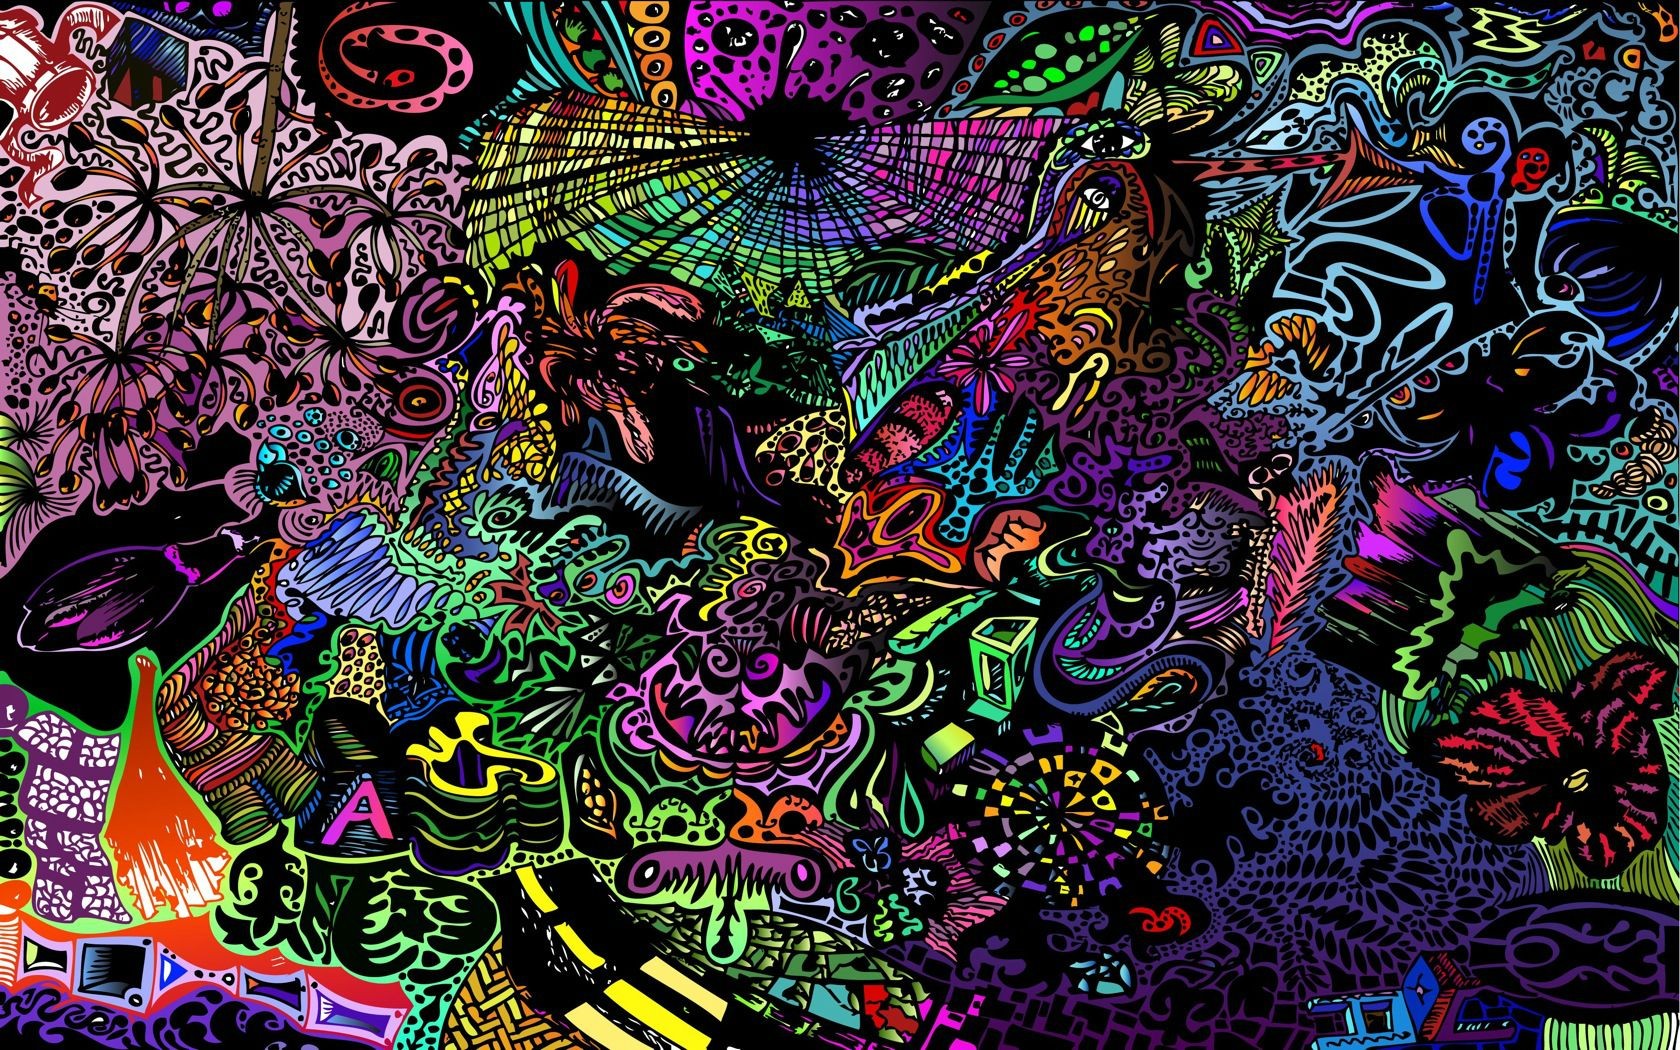 General 1680x1050 colorful abstract surreal artwork